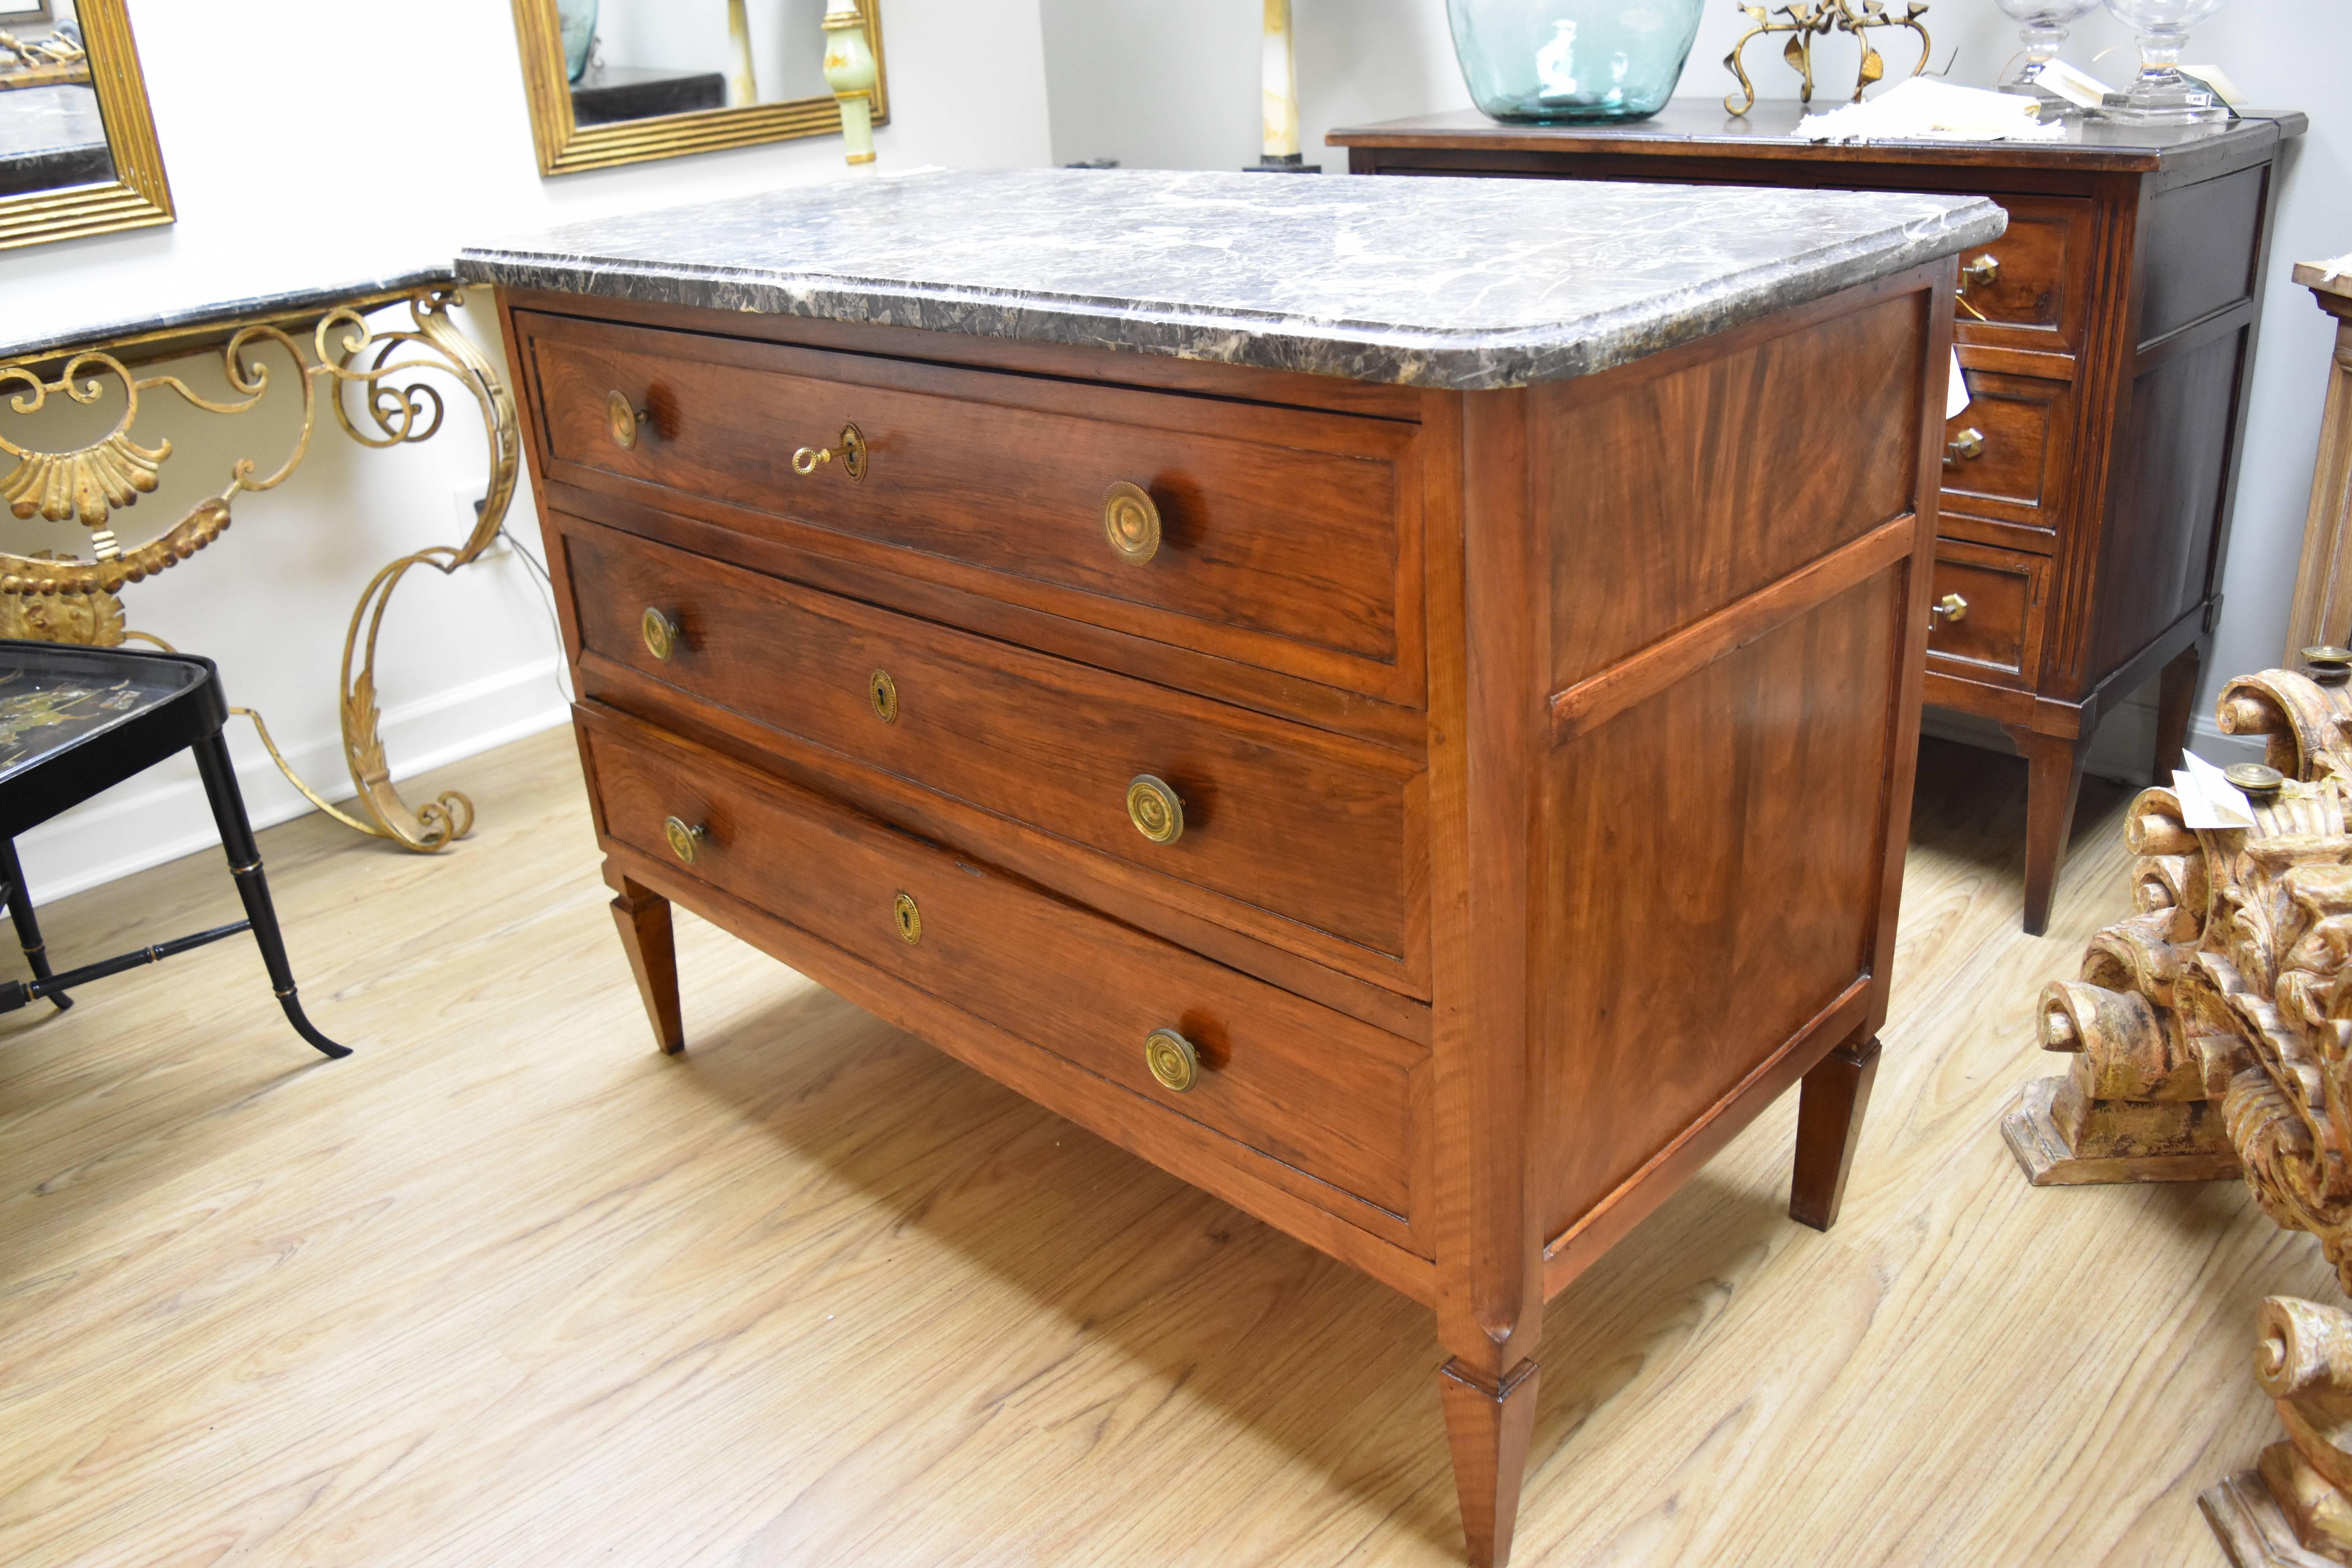 This 19th Century Walnut Commode features the original brass hardware and key as well as a beveled marble top.  The drawers are all functional and the legs are simply tapered.